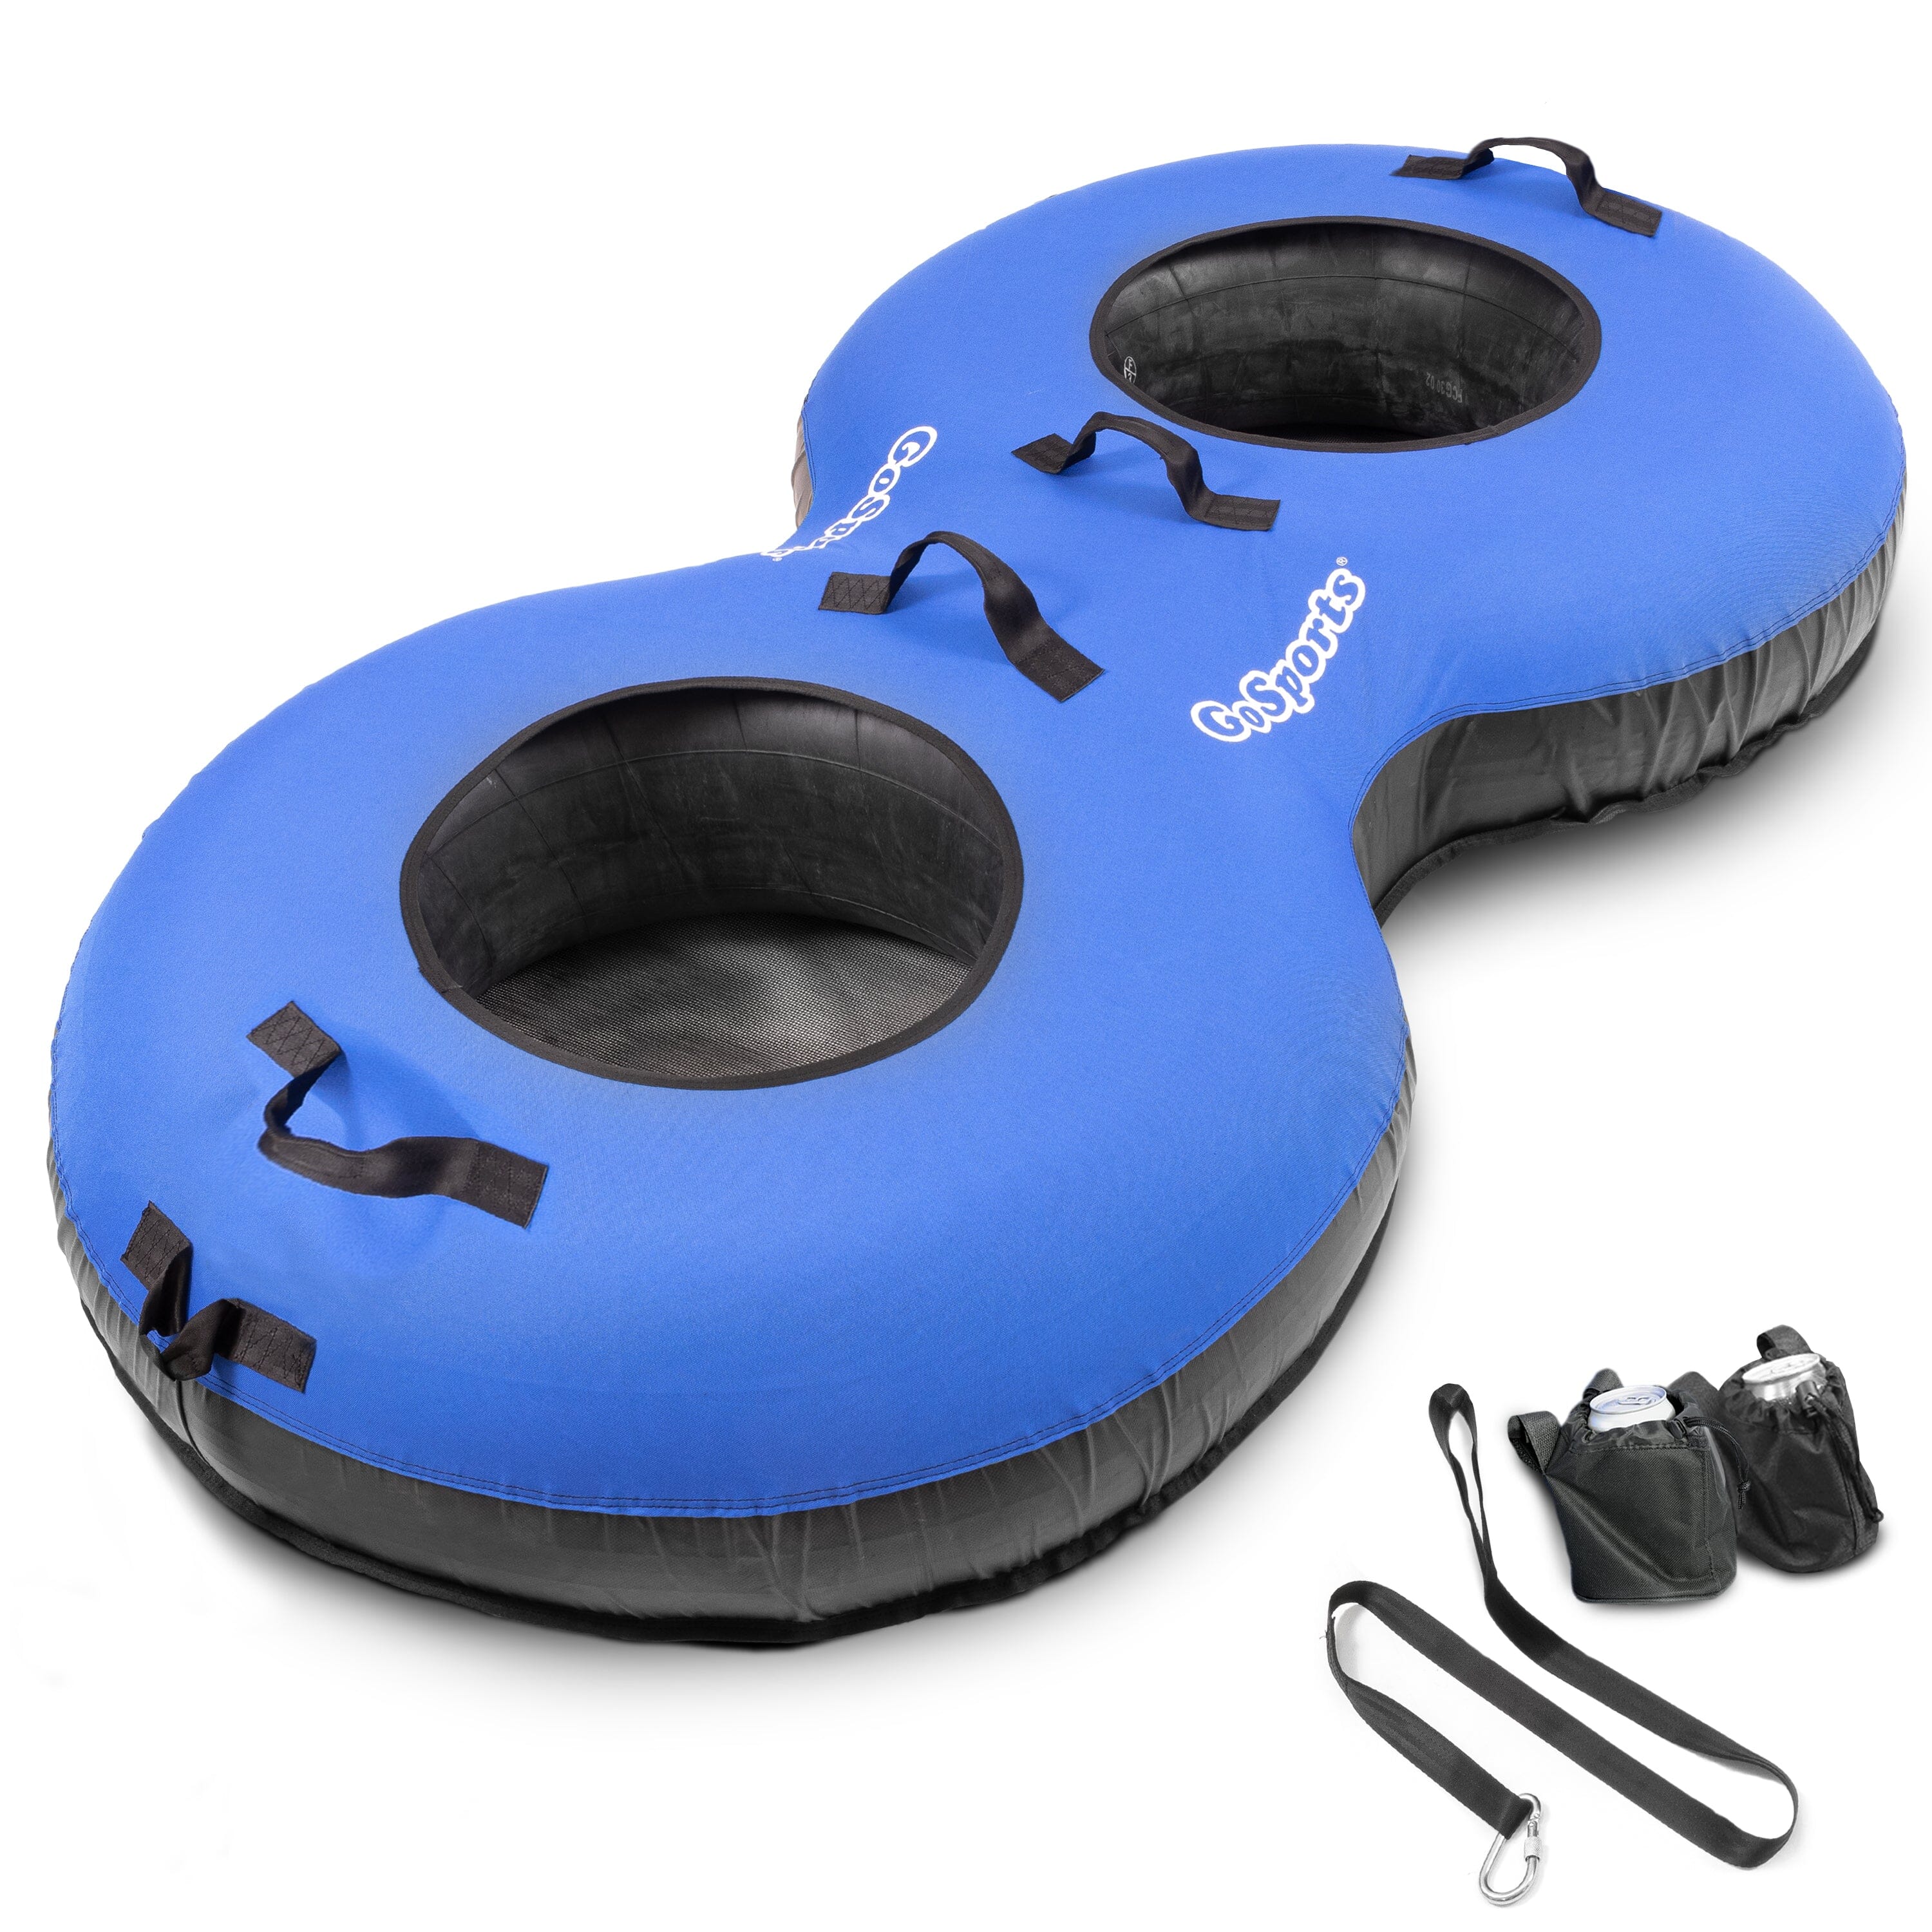 GoSports Heavy Duty 2 Person Floating River Tube with Premium Canvas C –